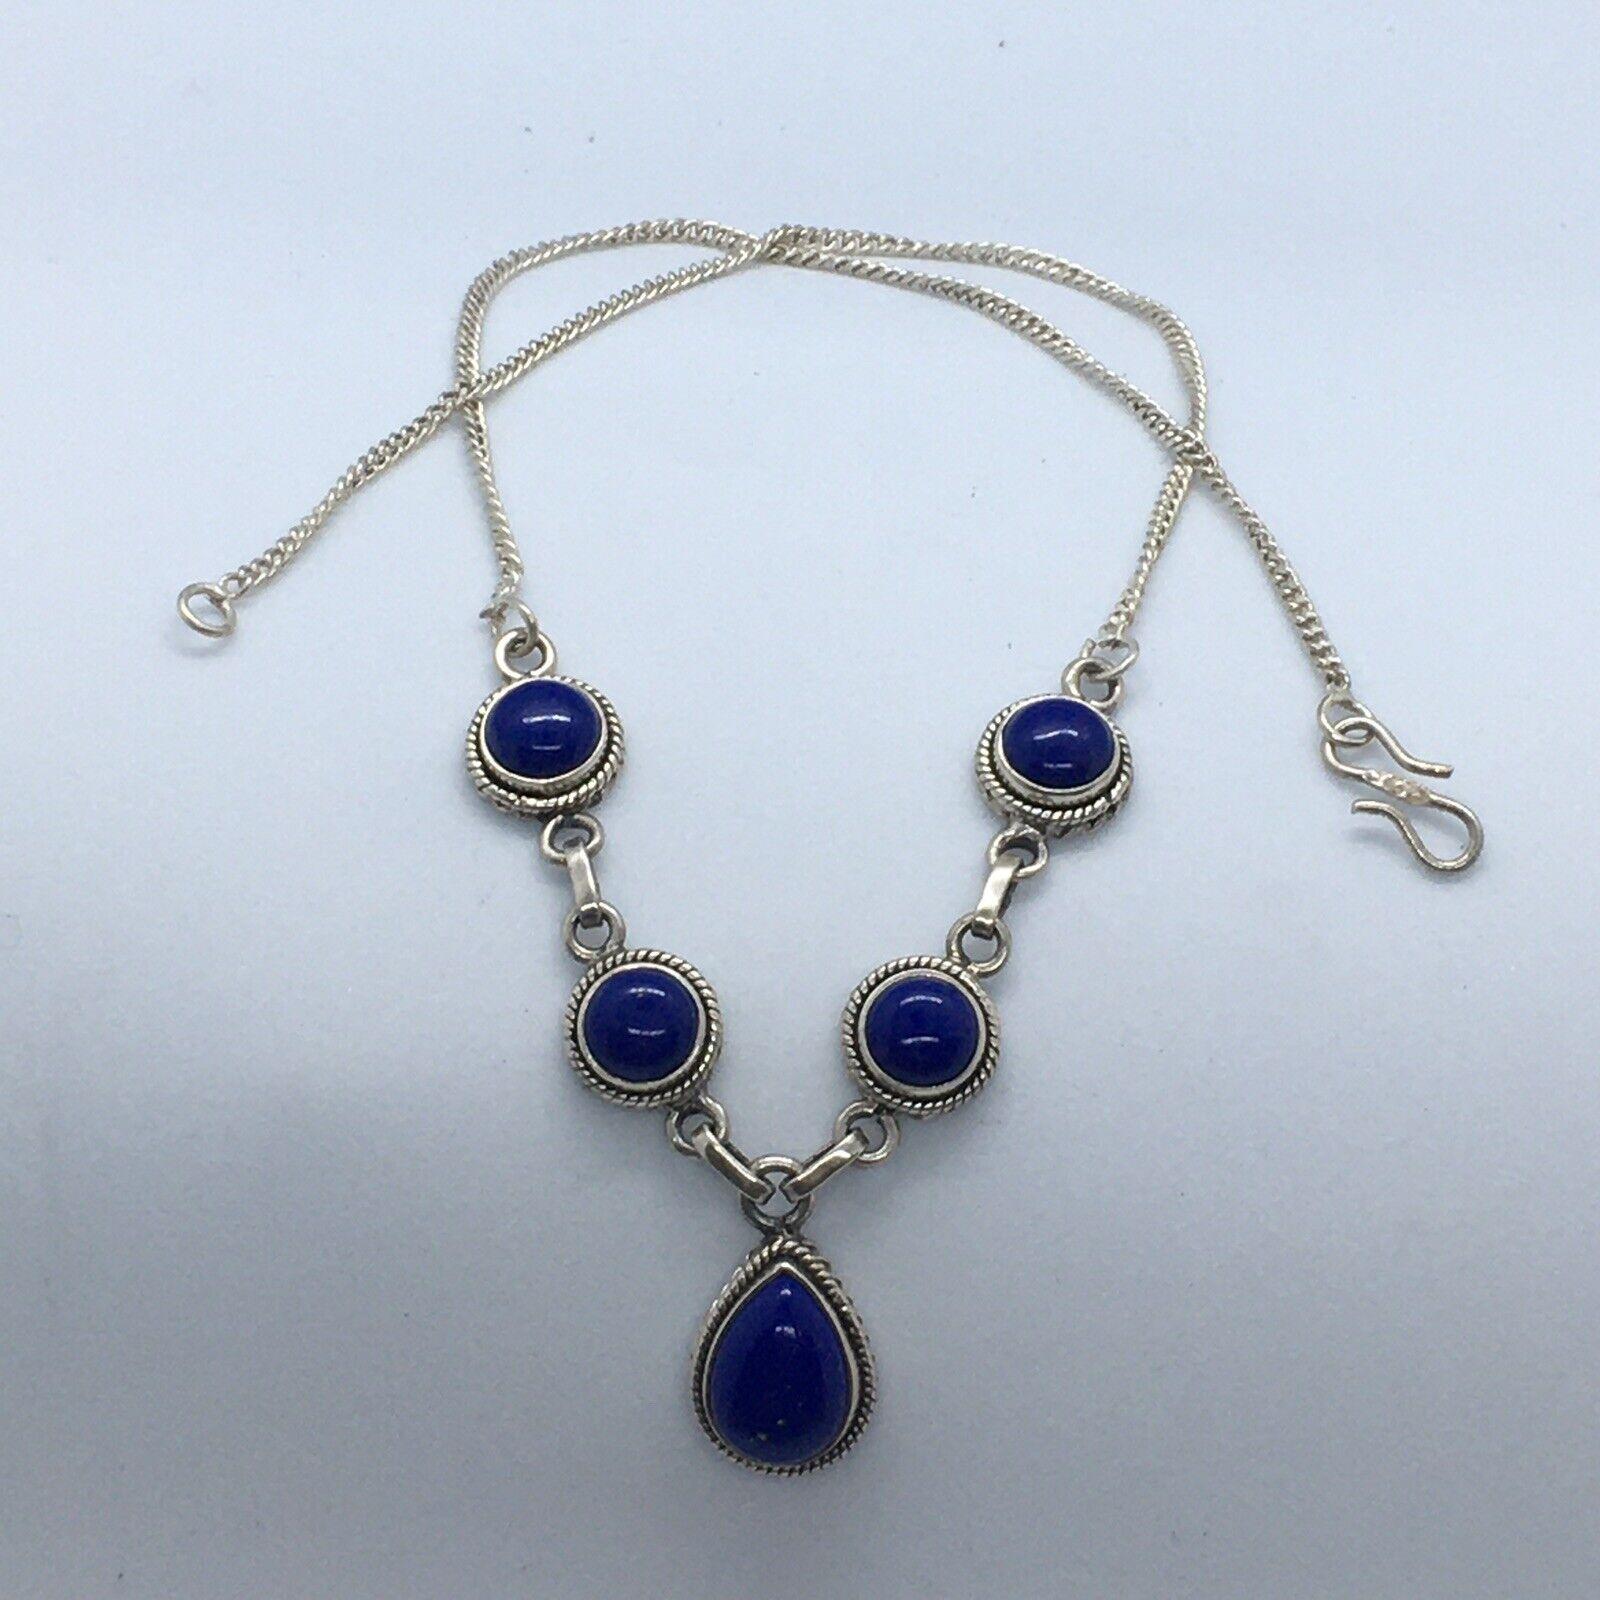 Artisan Sterling Silver Chilean Round & Pear Shape Cabochon Lapis Lazuli Necklace

Length 18.5 Inch   
Condition no evidence of repair 